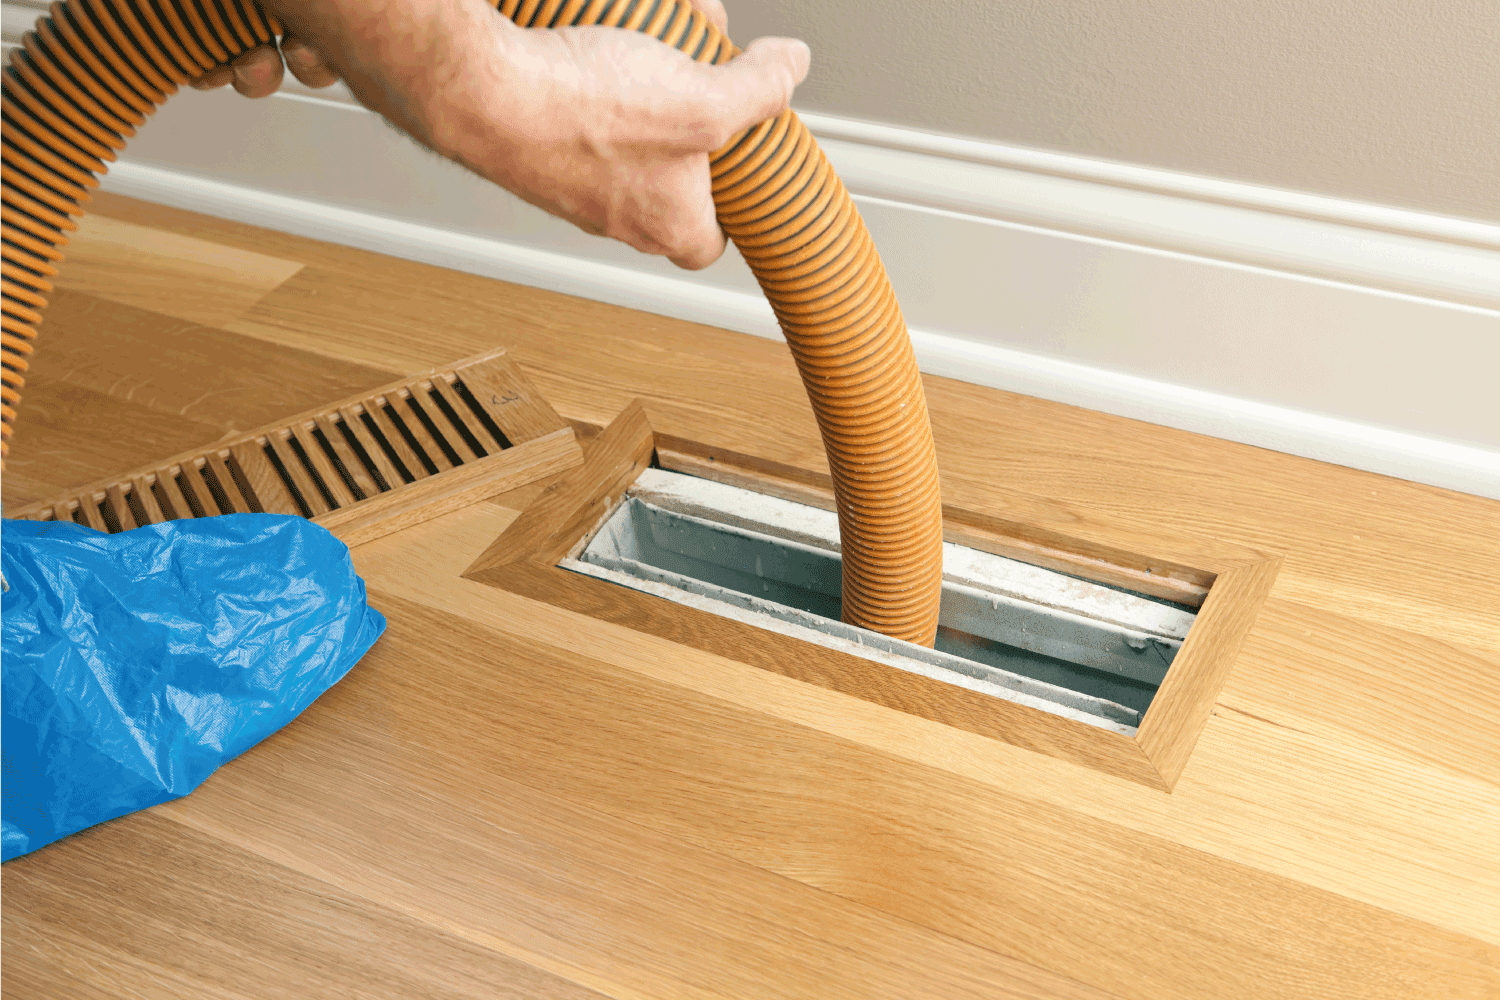 worker is using a shop vacuum to clean a vent and duct on a new hardwood floor